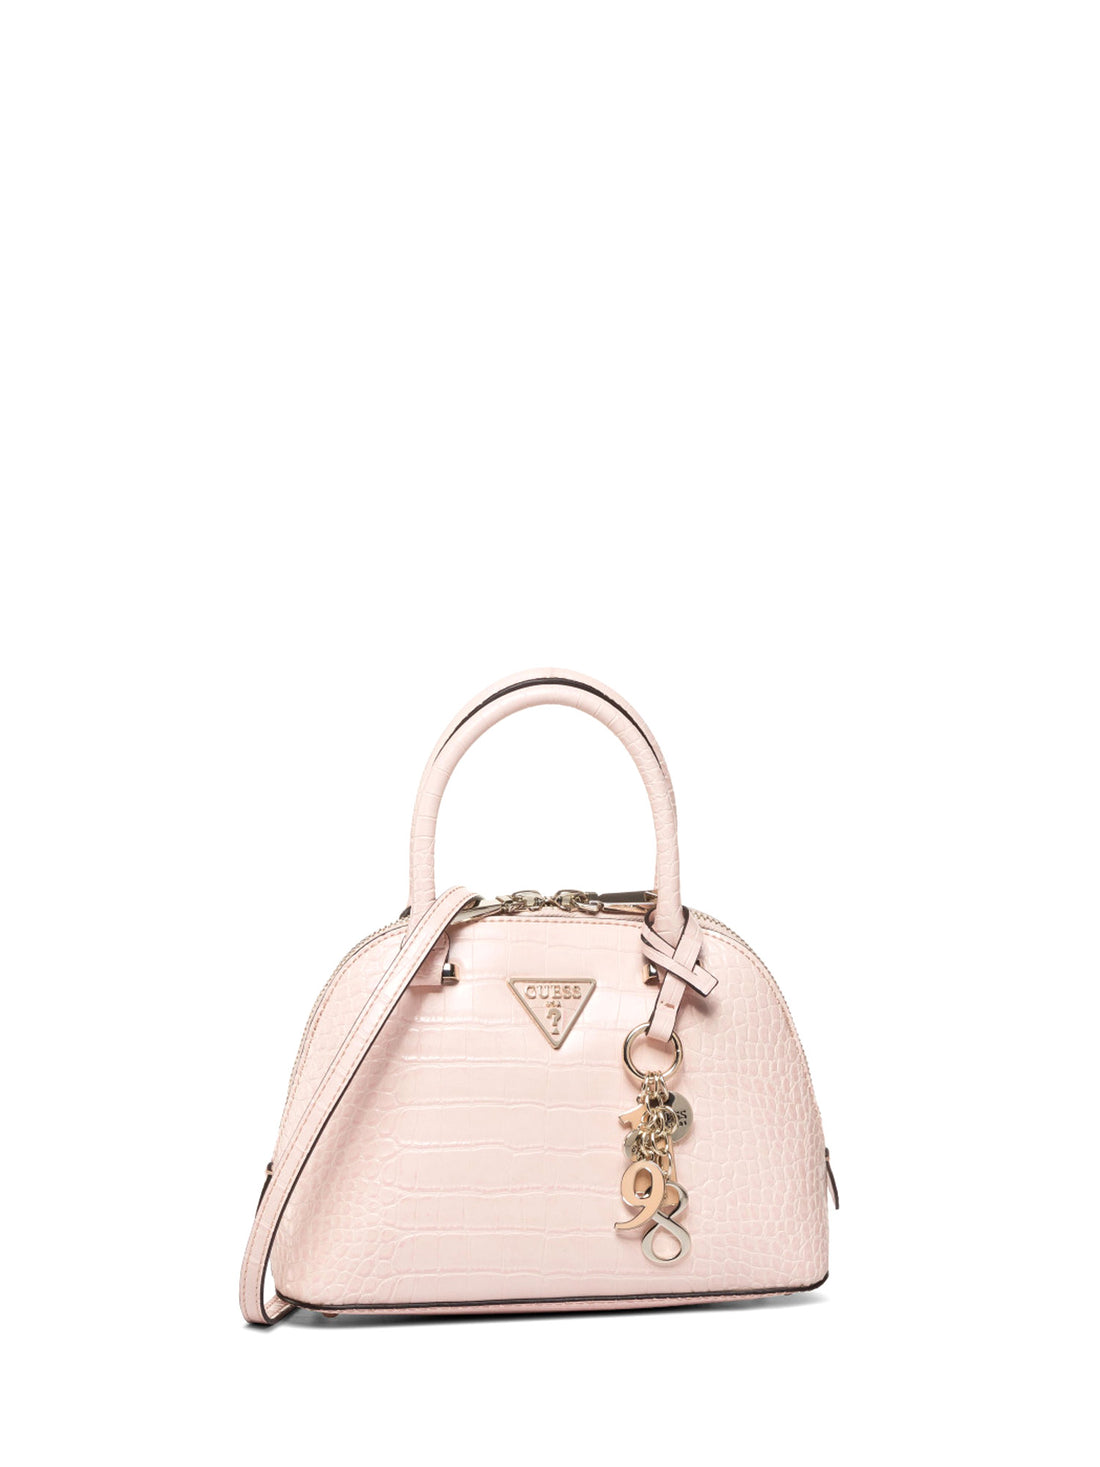 Bauletto Rosa Guess